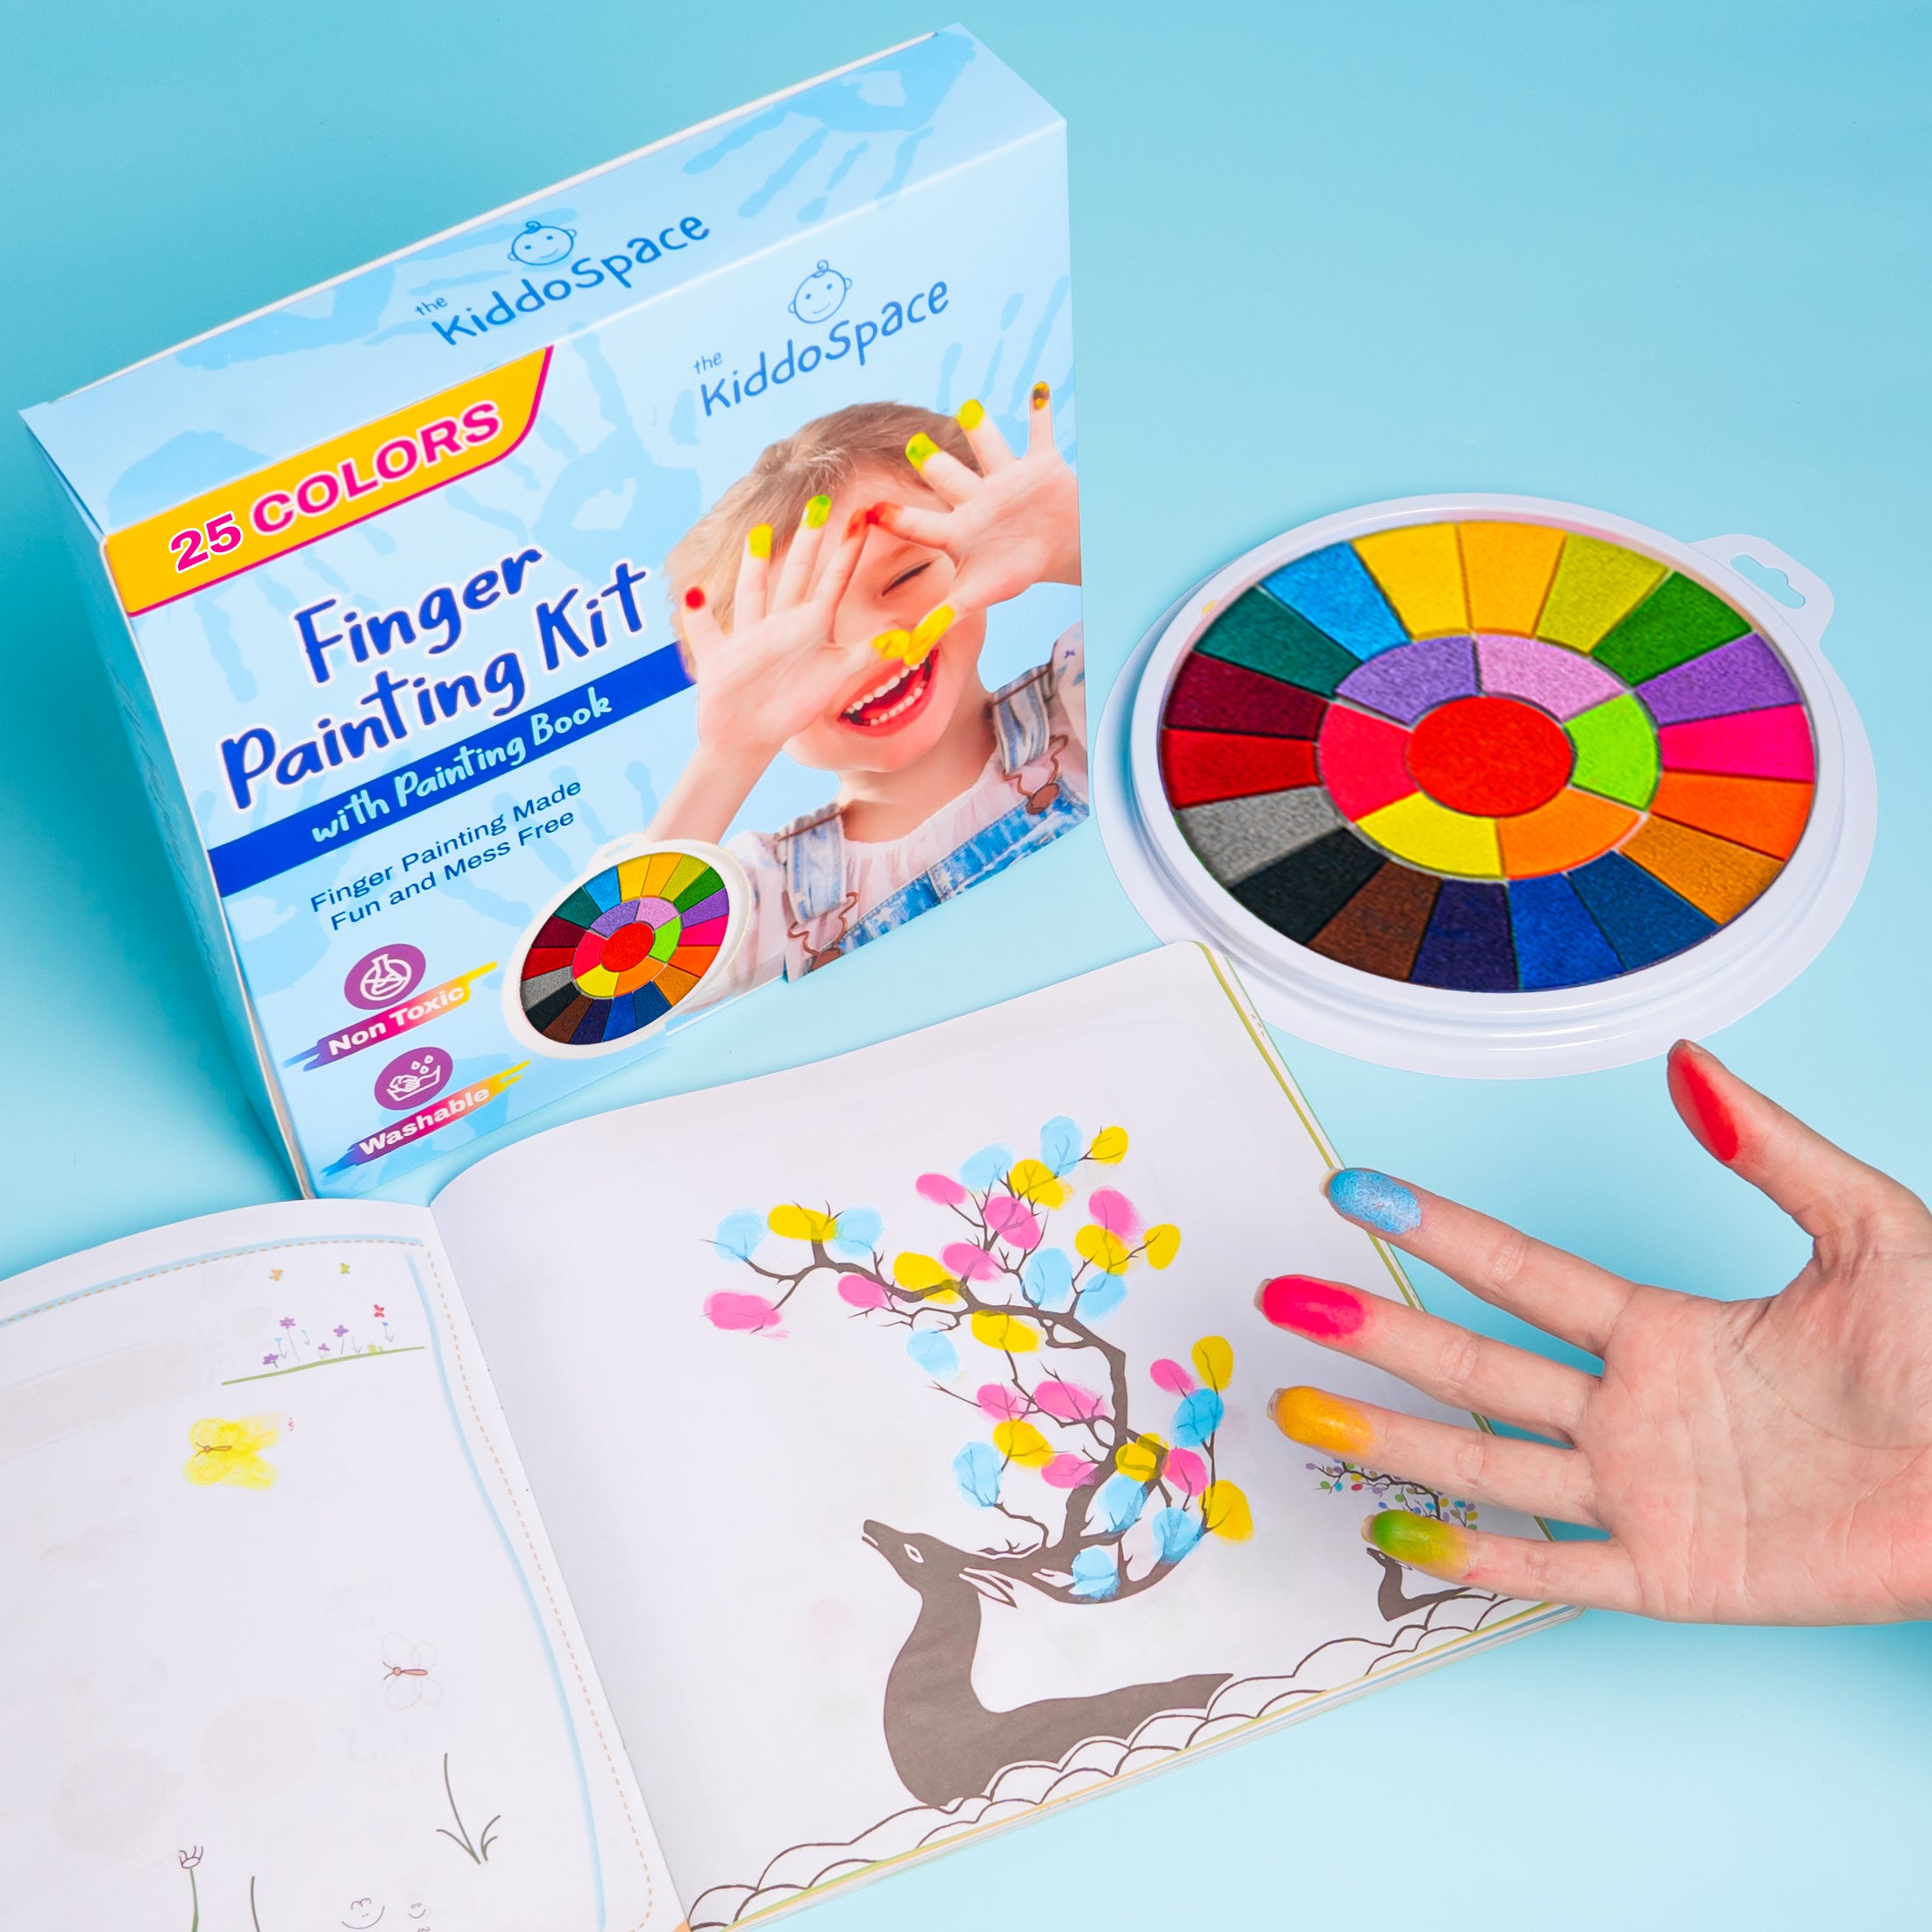 Kiddospace’s Finger Painting Kit - Let your child express their creativity mess-free